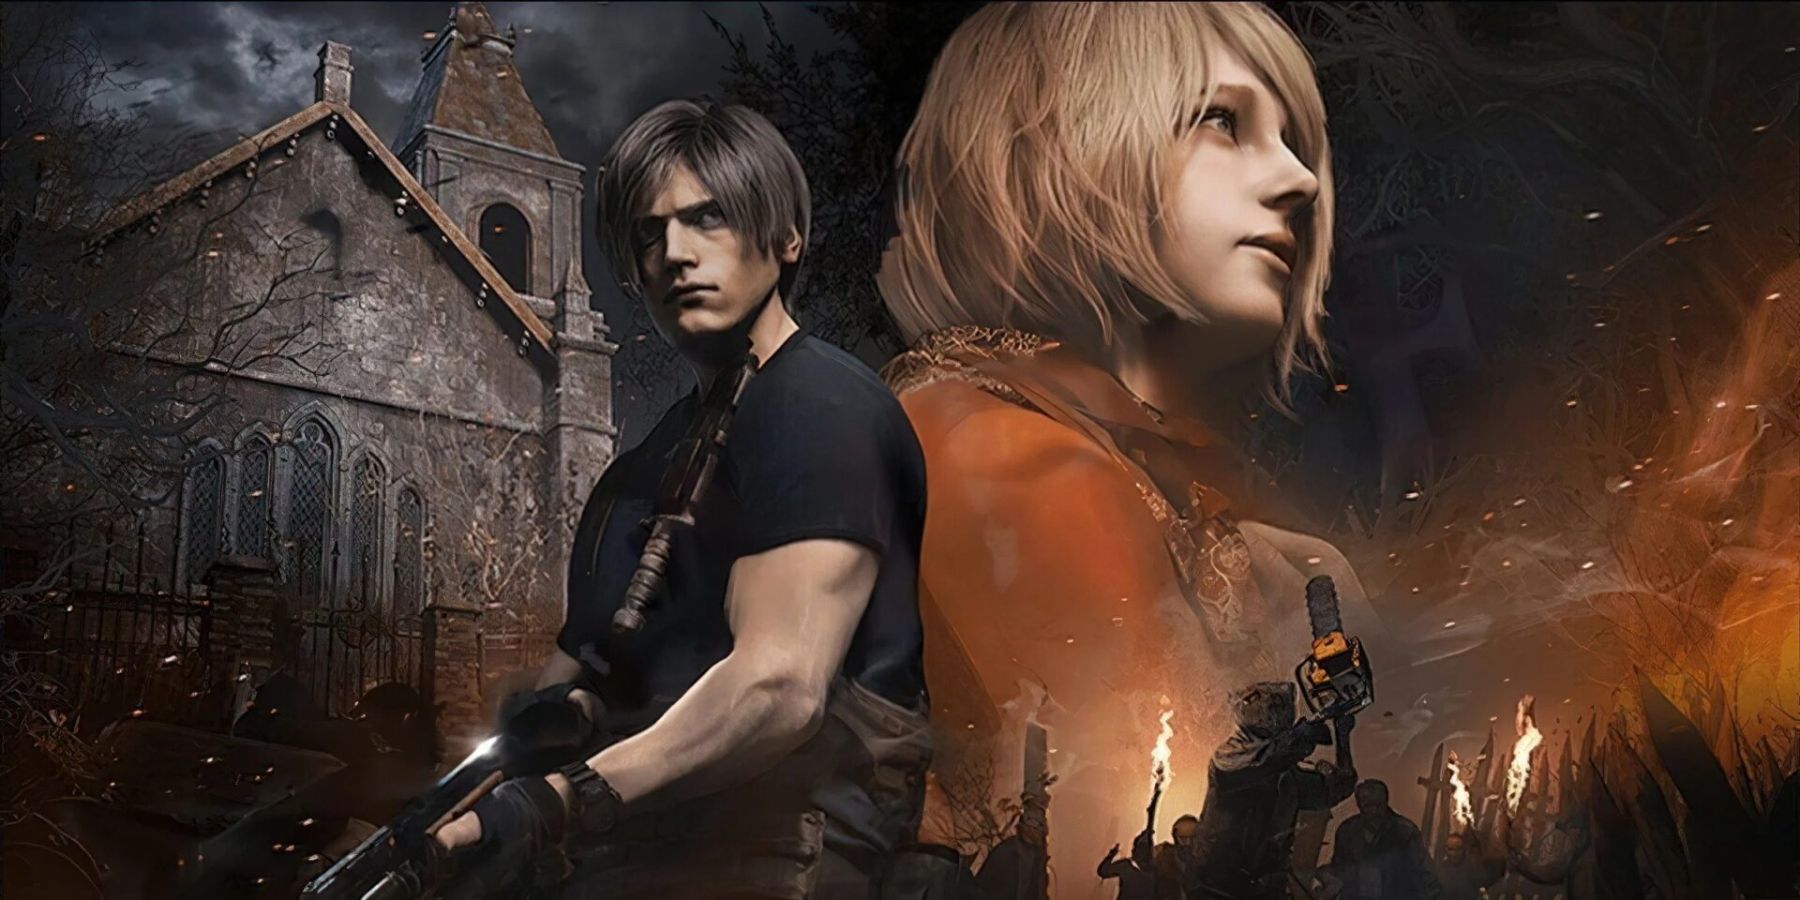 The key visual for the Resident Evil 4 remake, depicting Leon Kennedy and Ashley Graham by the game's castle.